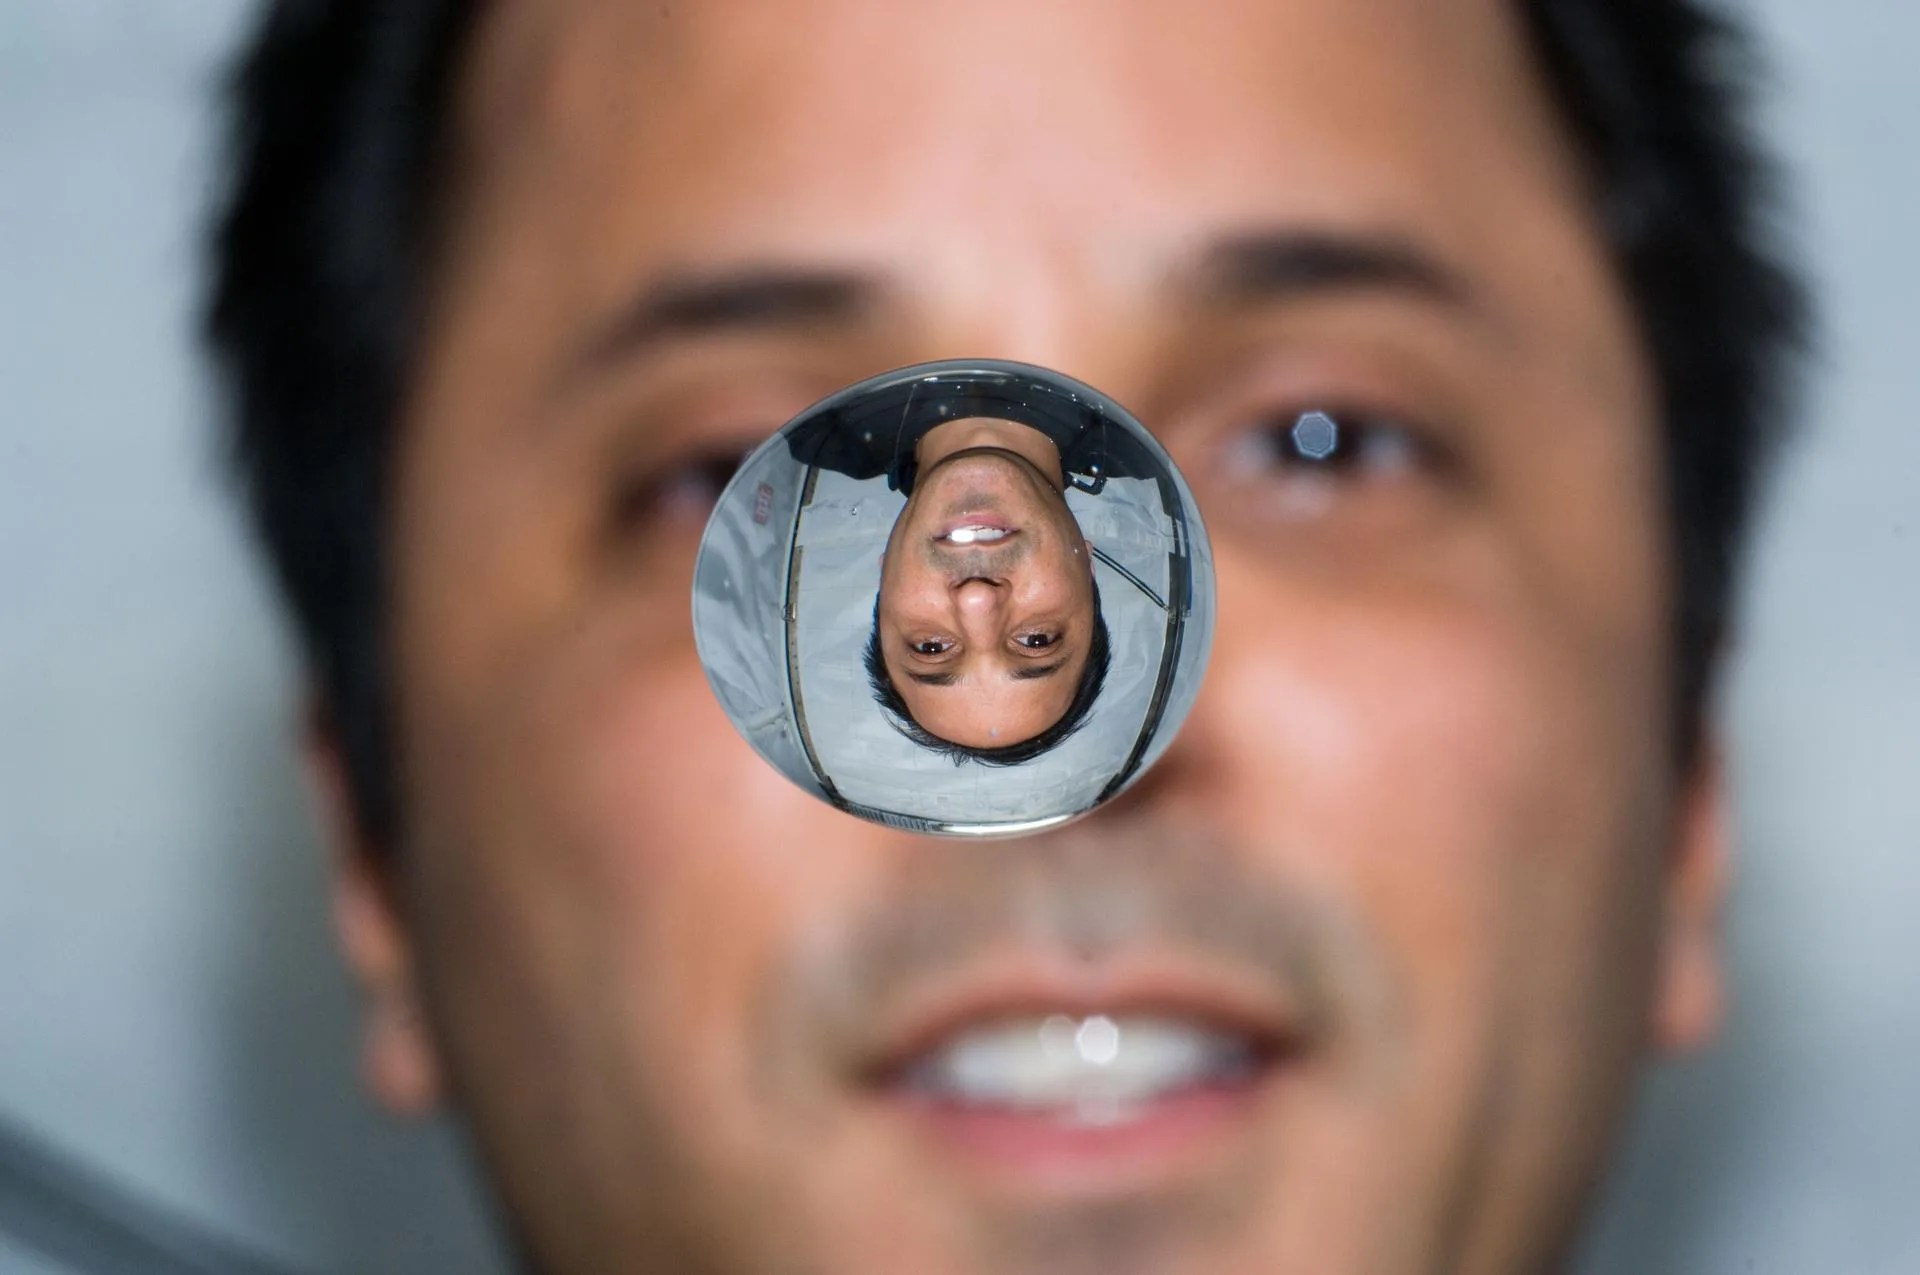 Man watches liquid bubble float in front of him, reflecting his face upside down.